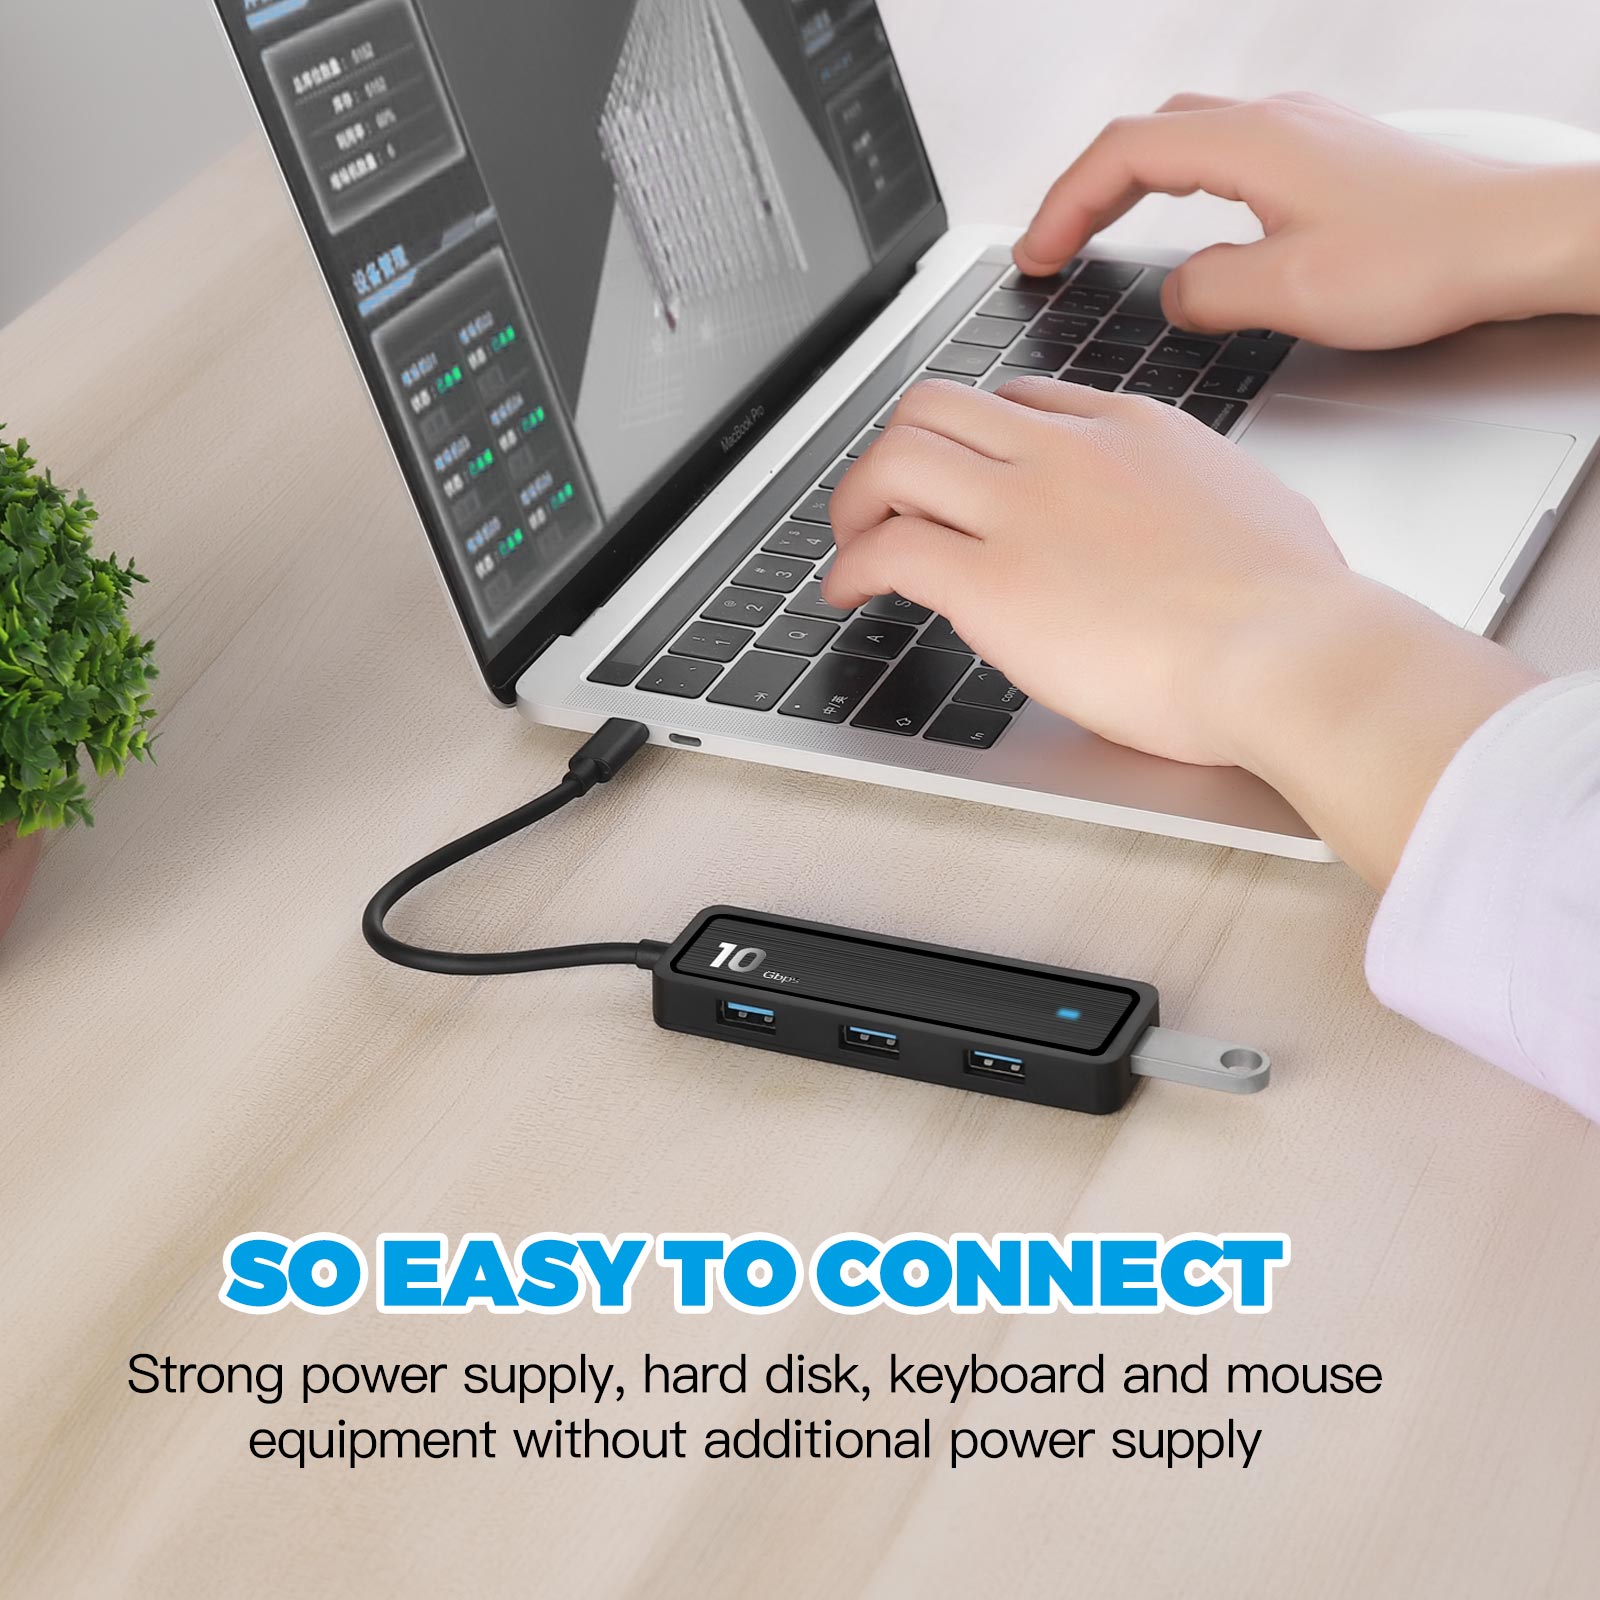 Pinrui 6 in 1 USB Hub 4-Port USB3.1 Gen 2 Expander with SD/ TF Adapter Laptop Docking Station